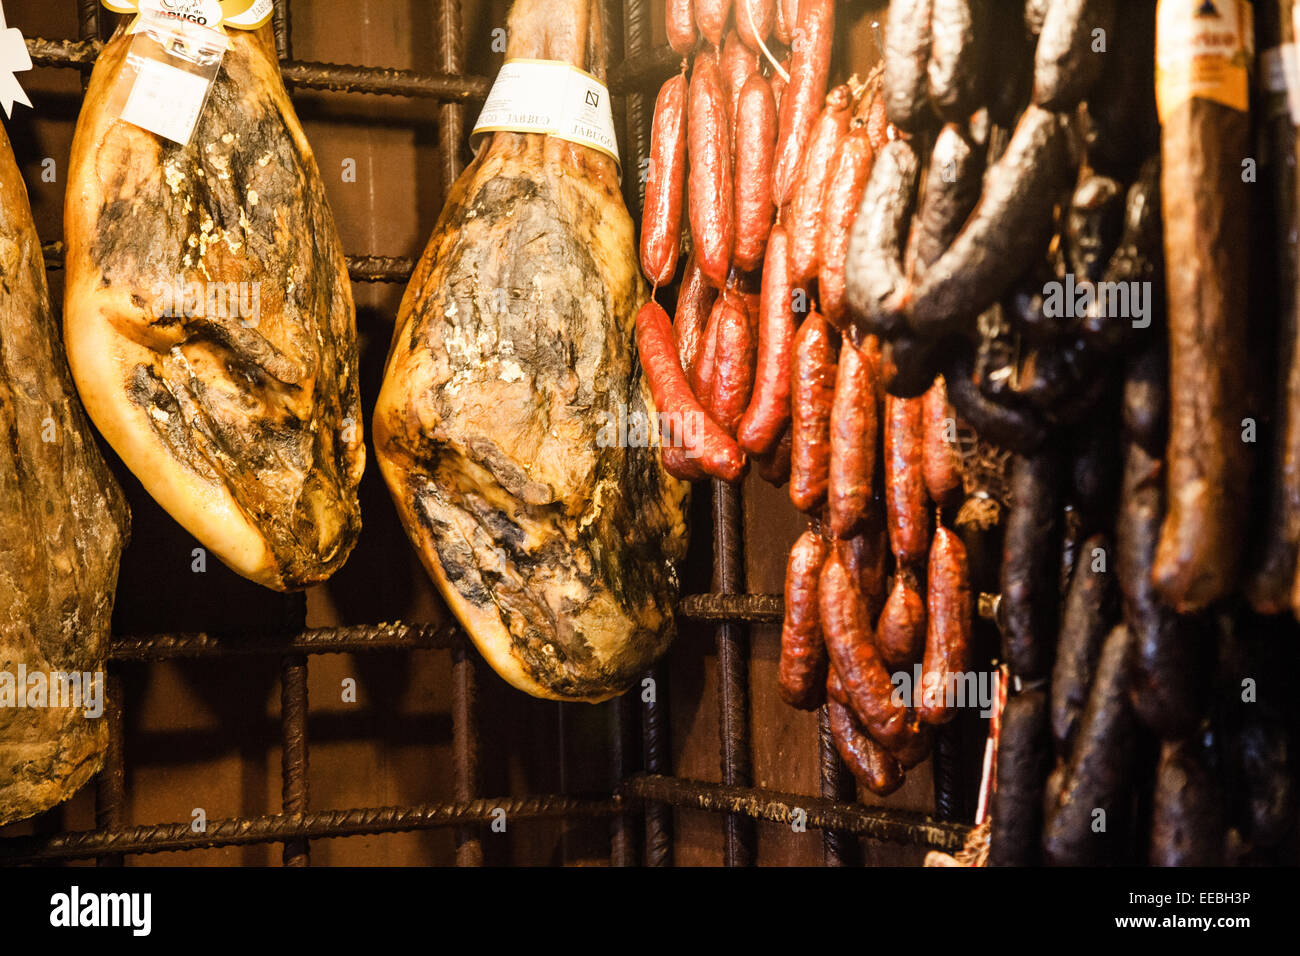 Spain typical gastronomy Stock Photo